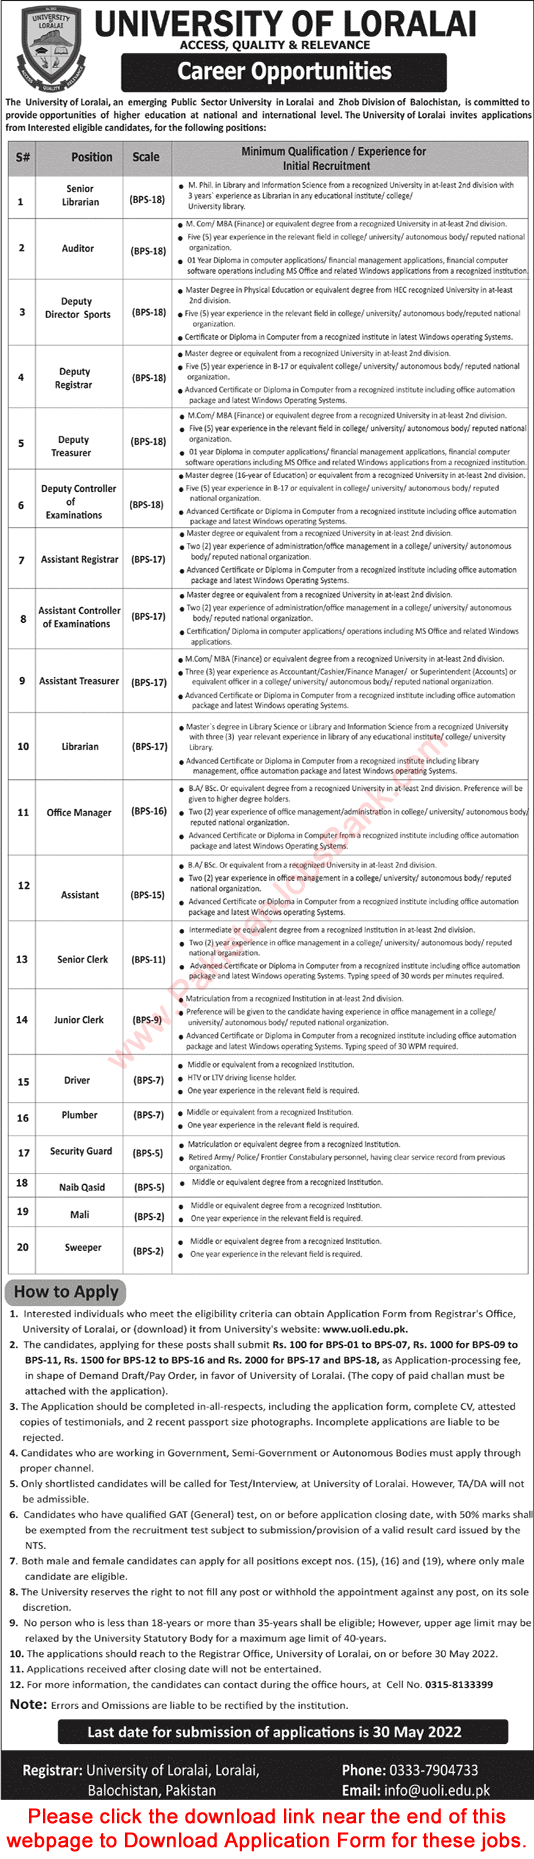 University of Loralai Jobs 2022 May Application Form Assistants, Clerks & Others Latest